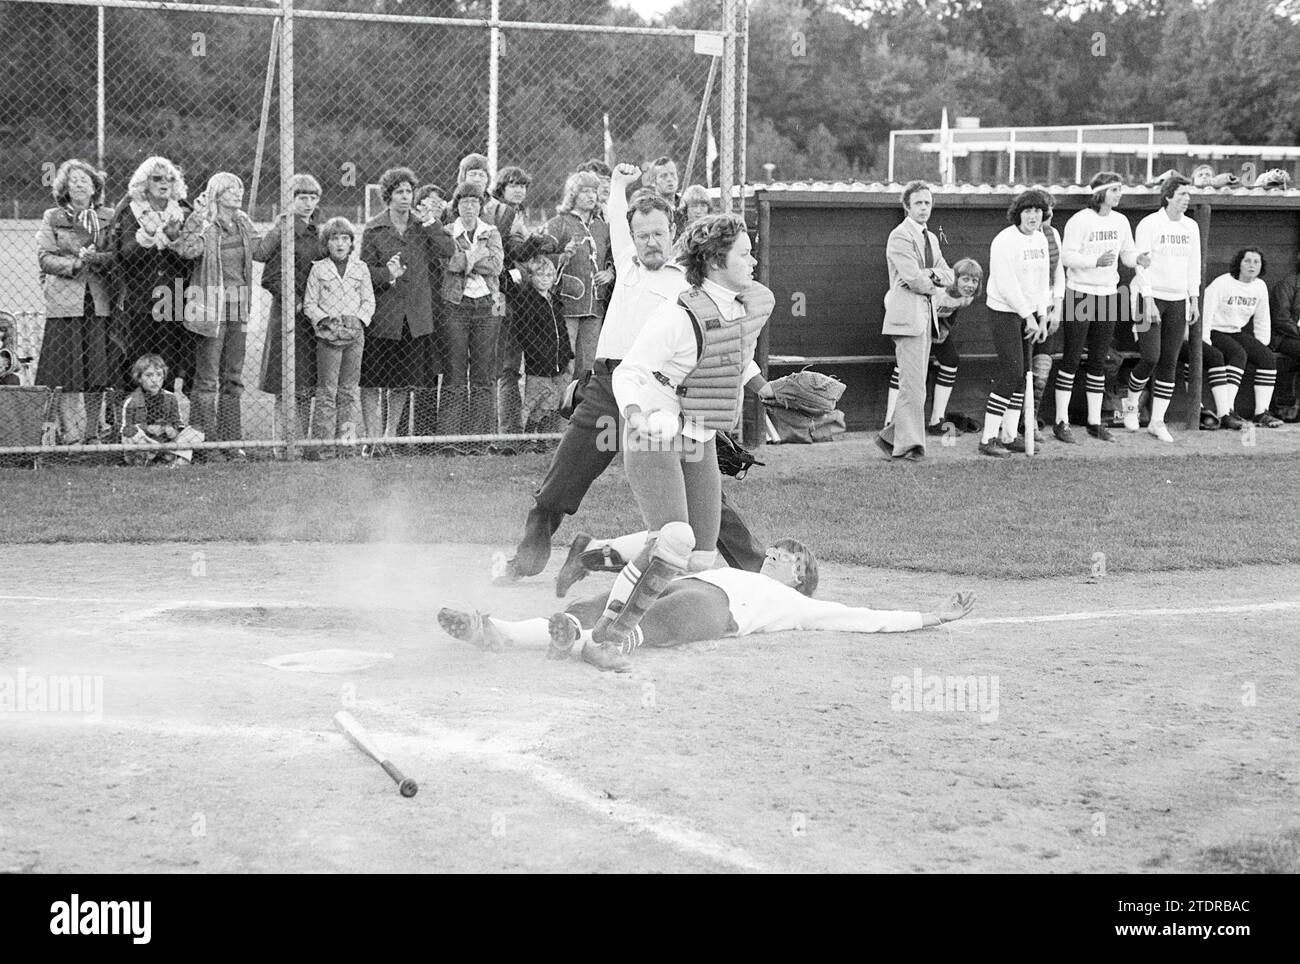 Bloemendaal - D.Tours Storks, Softball, 17-09-1977, Whizgle News from the Past, Tailored for the Future. Explore historical narratives, Dutch The Netherlands agency image with a modern perspective, bridging the gap between yesterday's events and tomorrow's insights. A timeless journey shaping the stories that shape our future Stock Photo